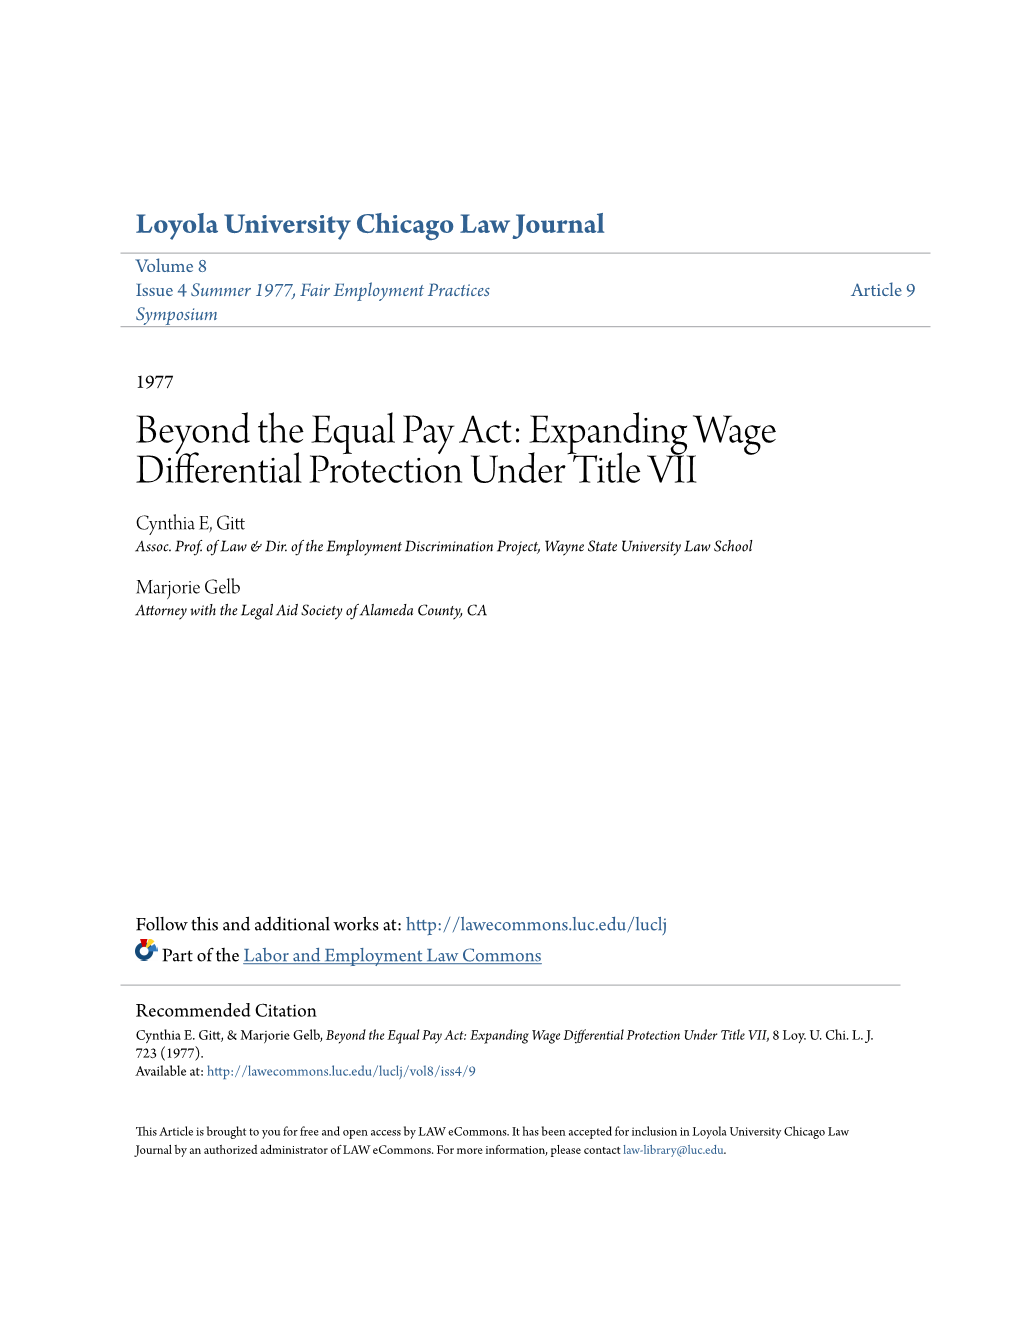 Expanding Wage Differential Protection Under Title VII Cynthia E, Gitt Assoc